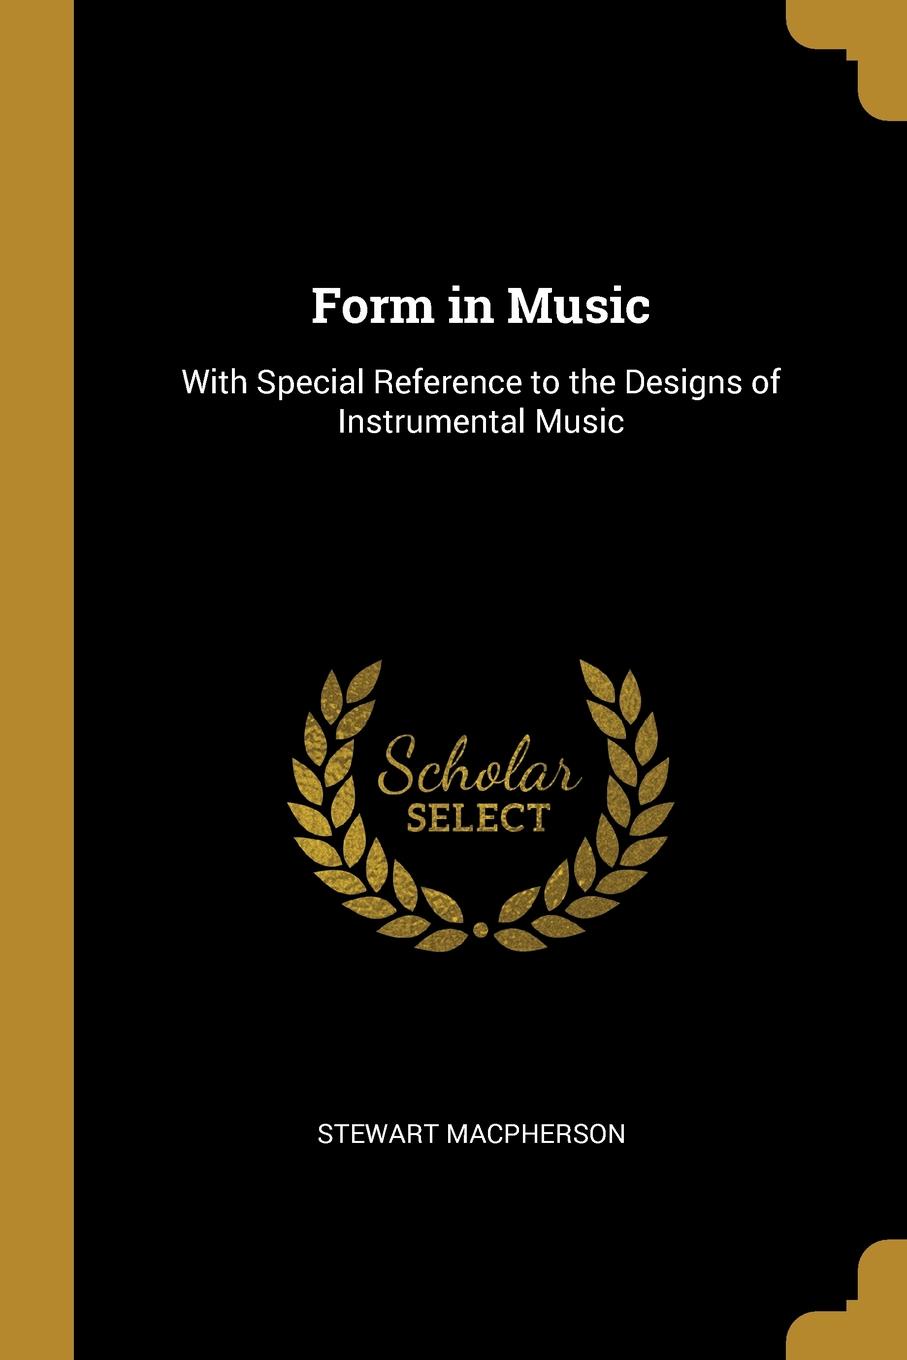 Form in Music. With Special Reference to the Designs of Instrumental Music